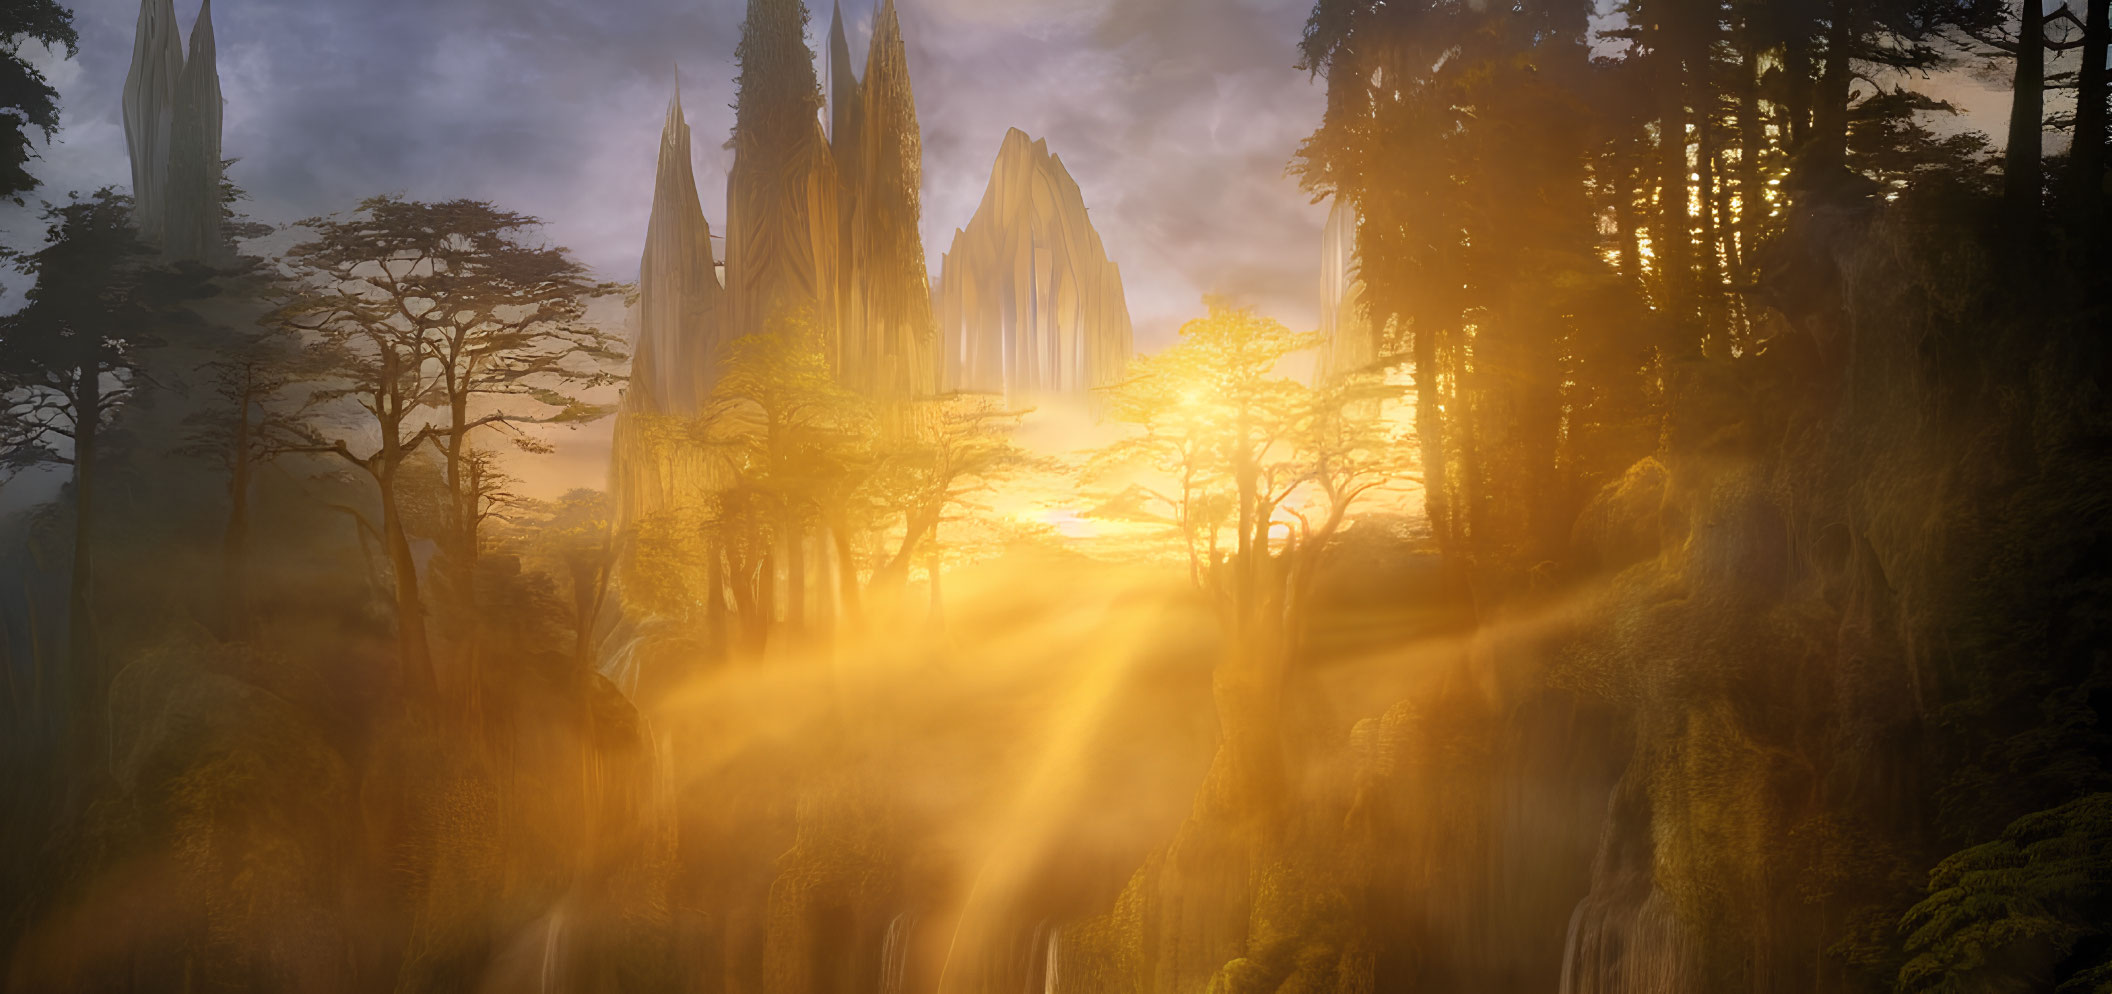 Majestic sunrise in mystical forest with towering spires